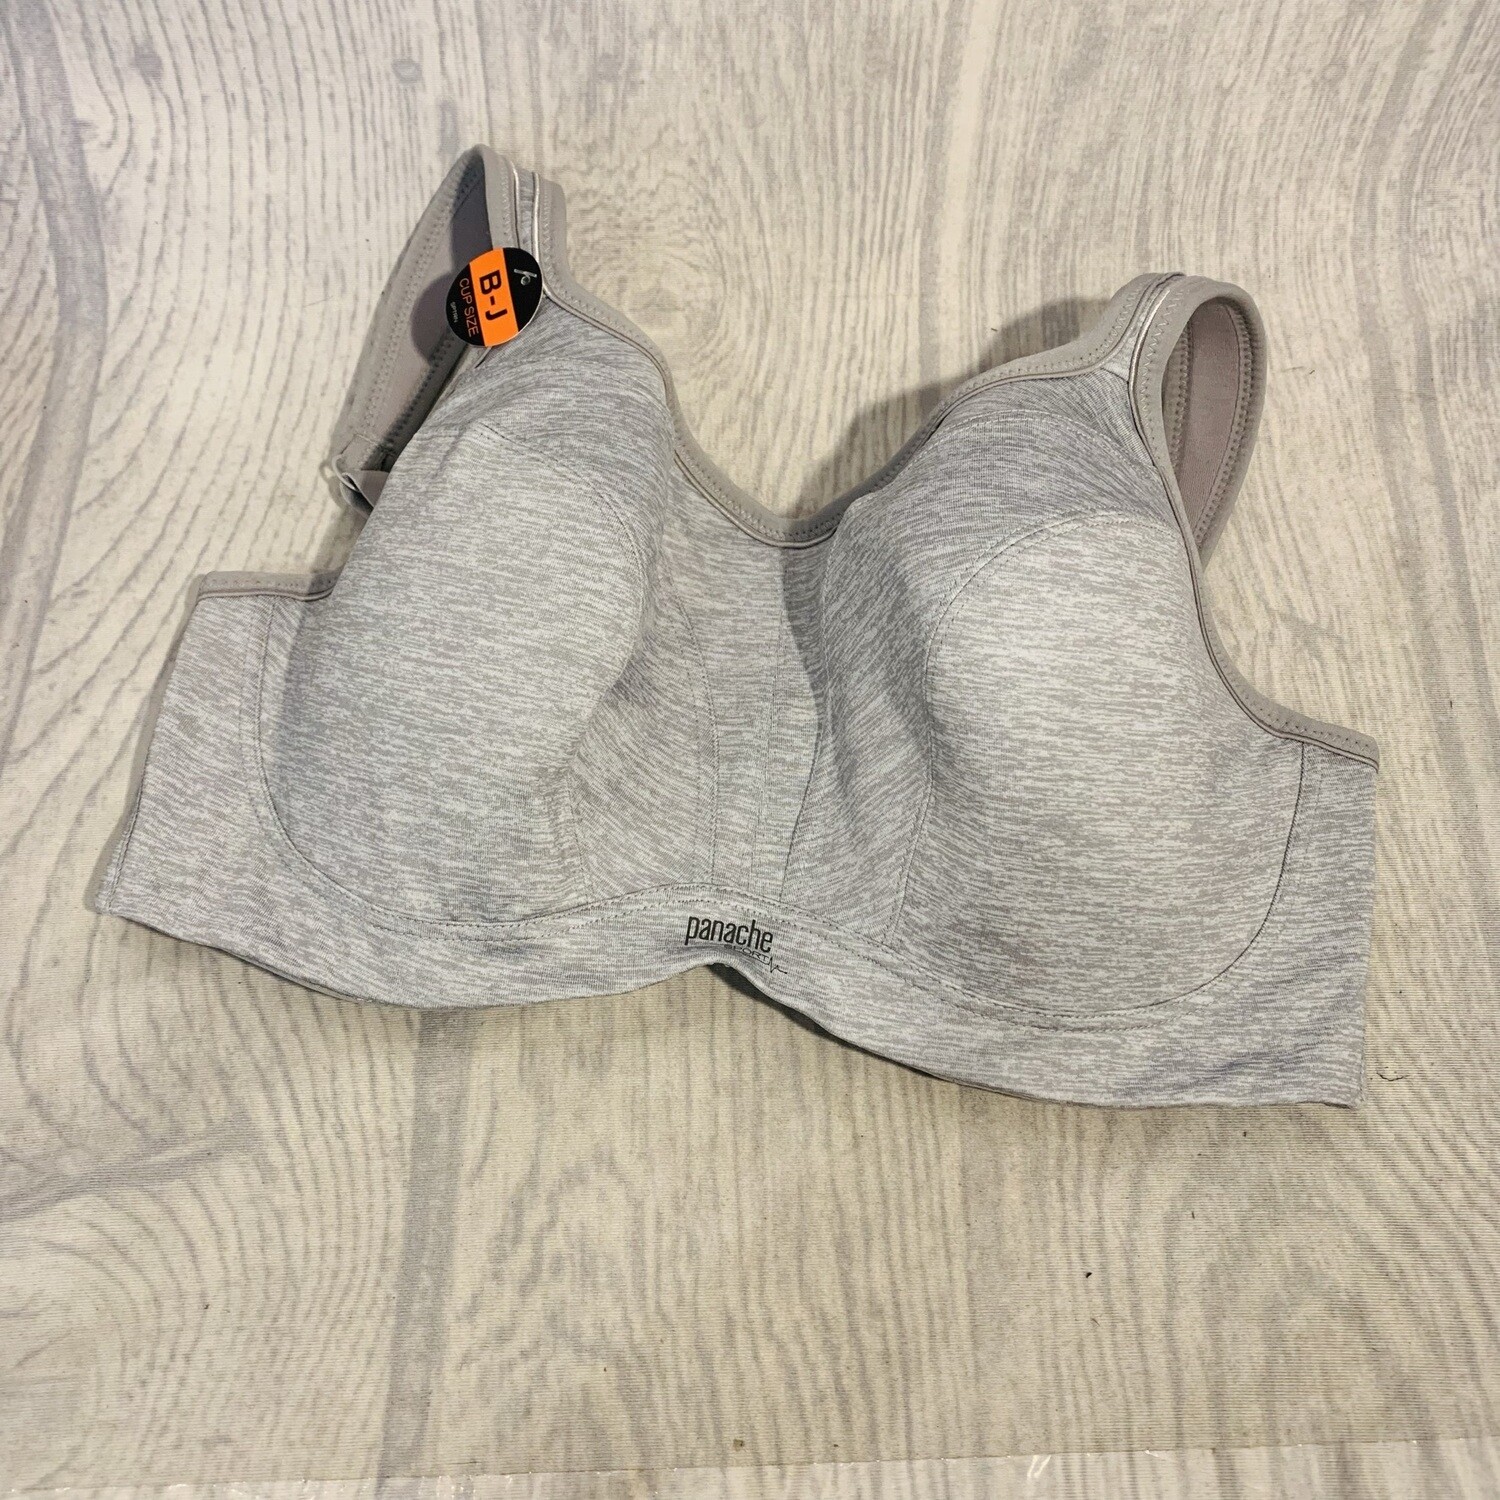 Size 36F Panache Full-Busted Underwire Sports Bra